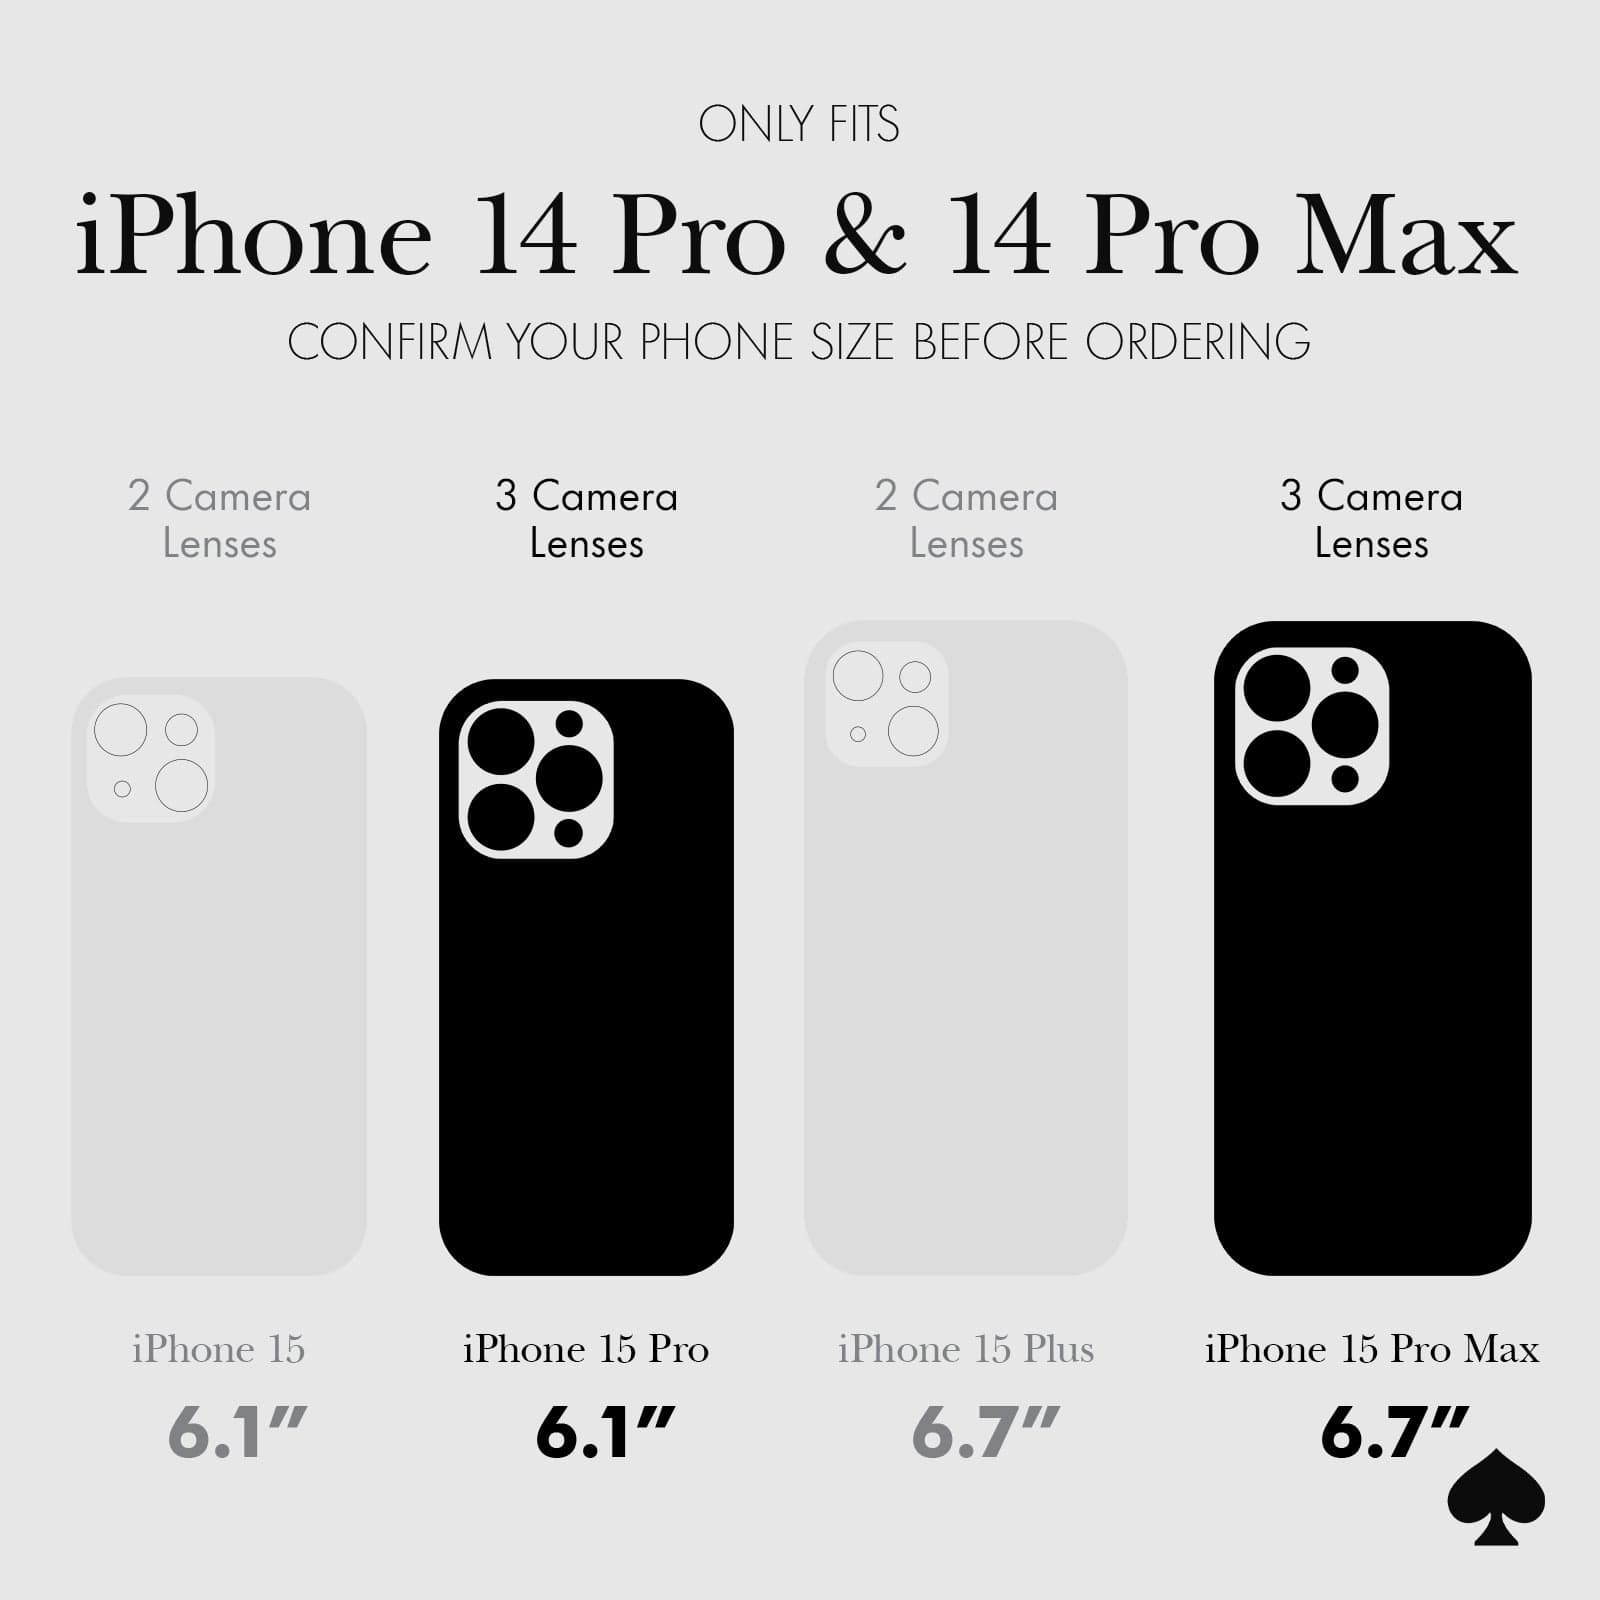 ONLY FITS IPHONE 14 PRO & 14 PRO MAX. CONFIRM YOUR PHONE SIZE BEFORE ORDERING